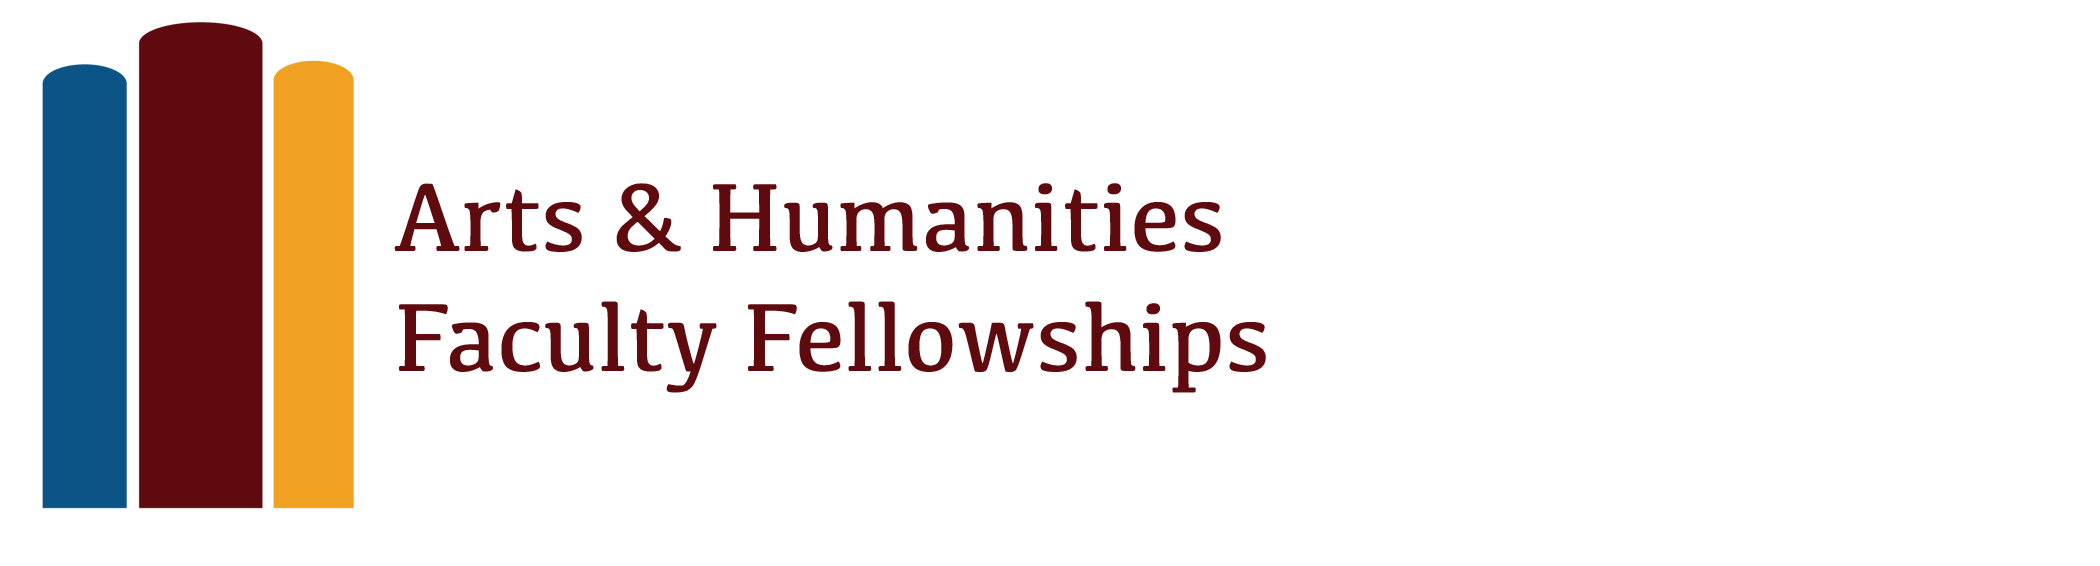 Abstract emblem of three books, dark blue, crimson, and gold, with the text "Arts & Humanities Faculty Fellowships"